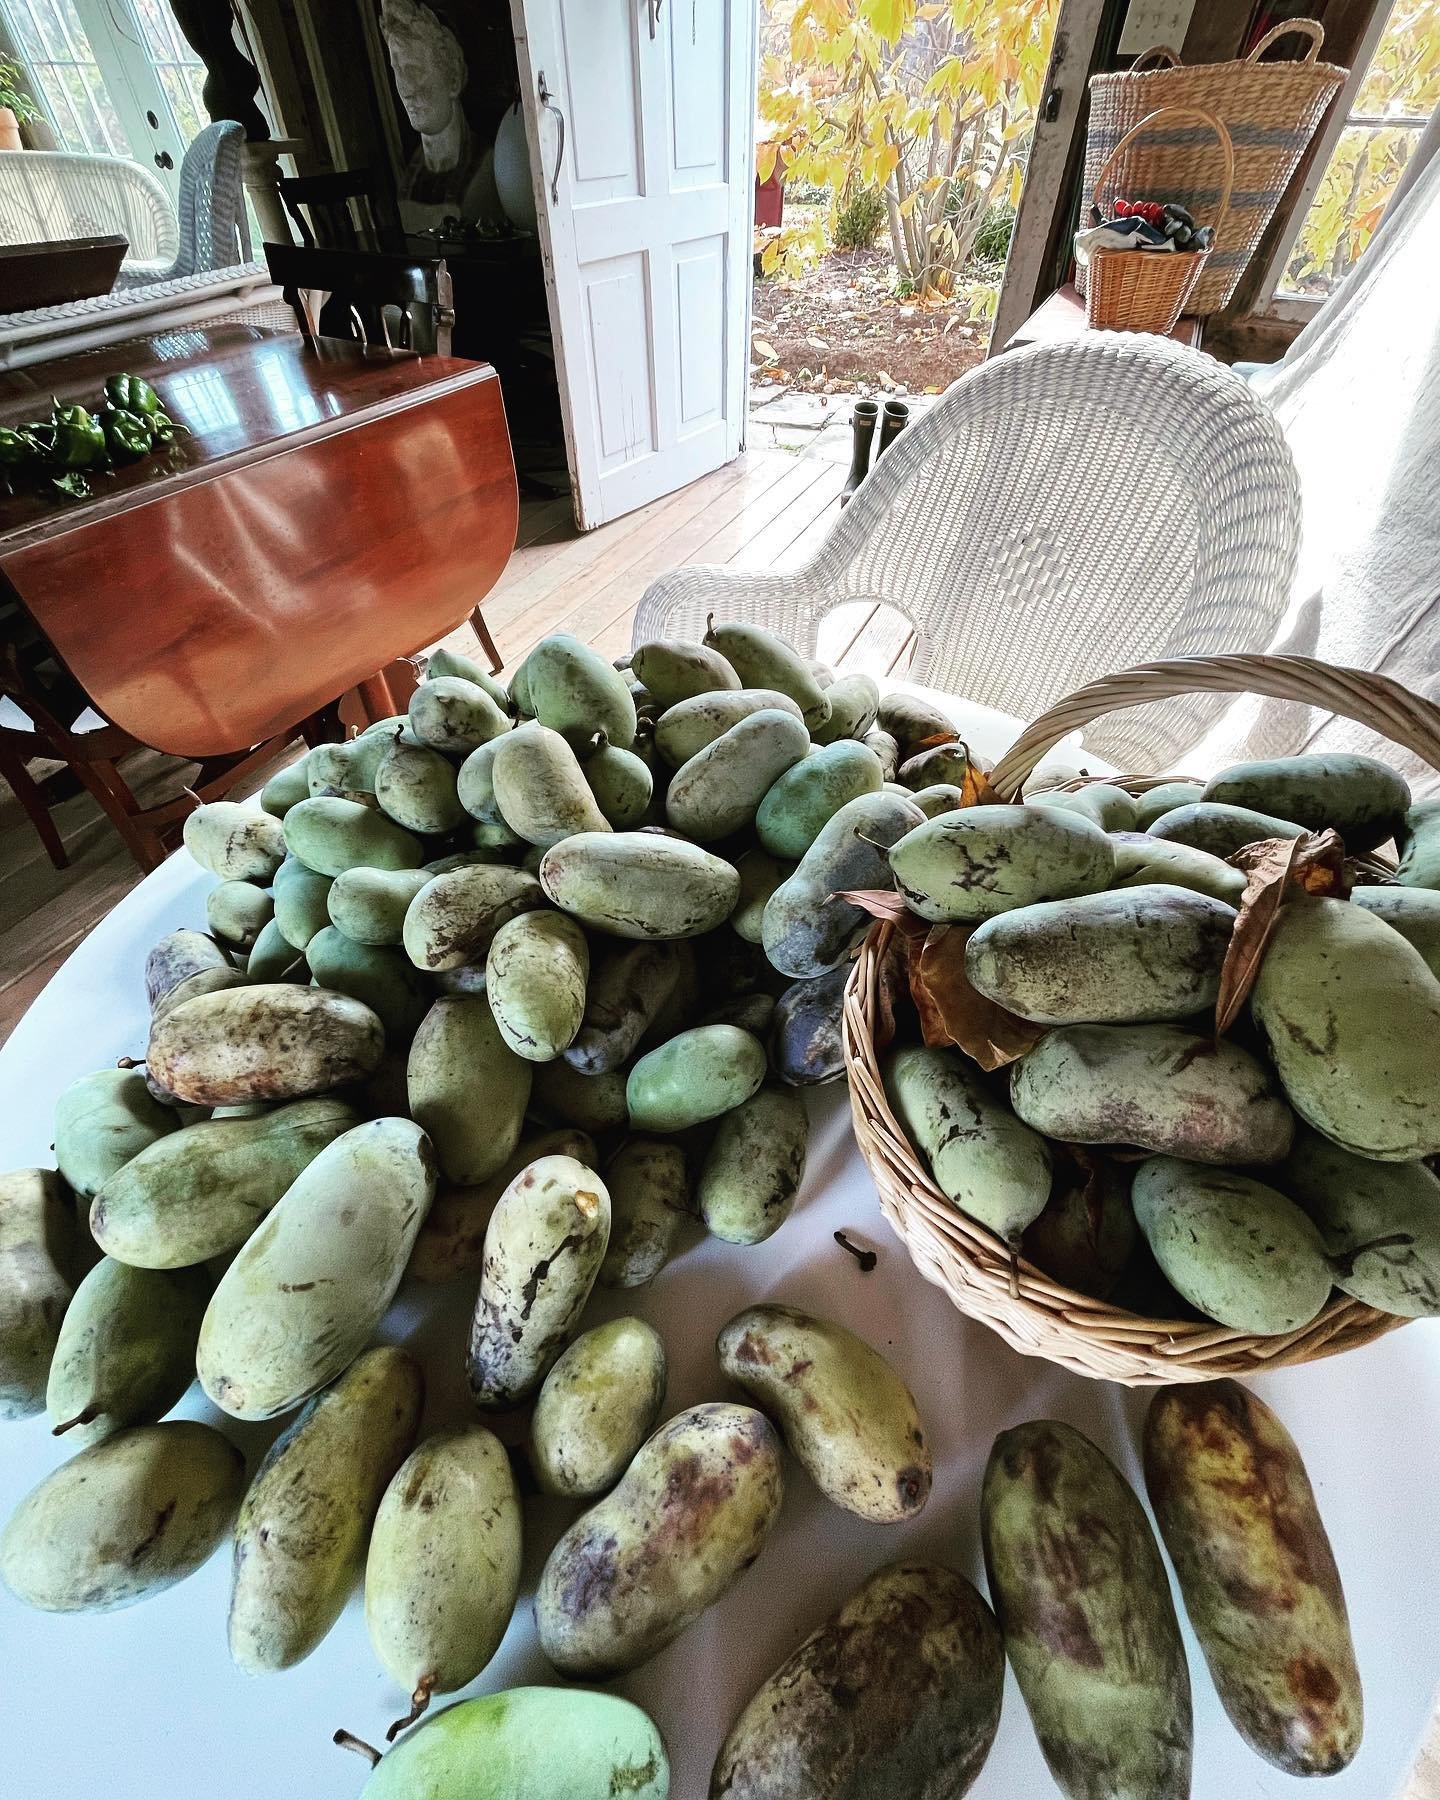 The #pawpaw harvest is a bit out of control this year. Come see me: www.airbnb.com/p/Beekmanmansion  #americancountryhouse #cottagecore #upstateny #bedandbreakfast #catskills #greekrevival #airbnb #airbnbsuperhost